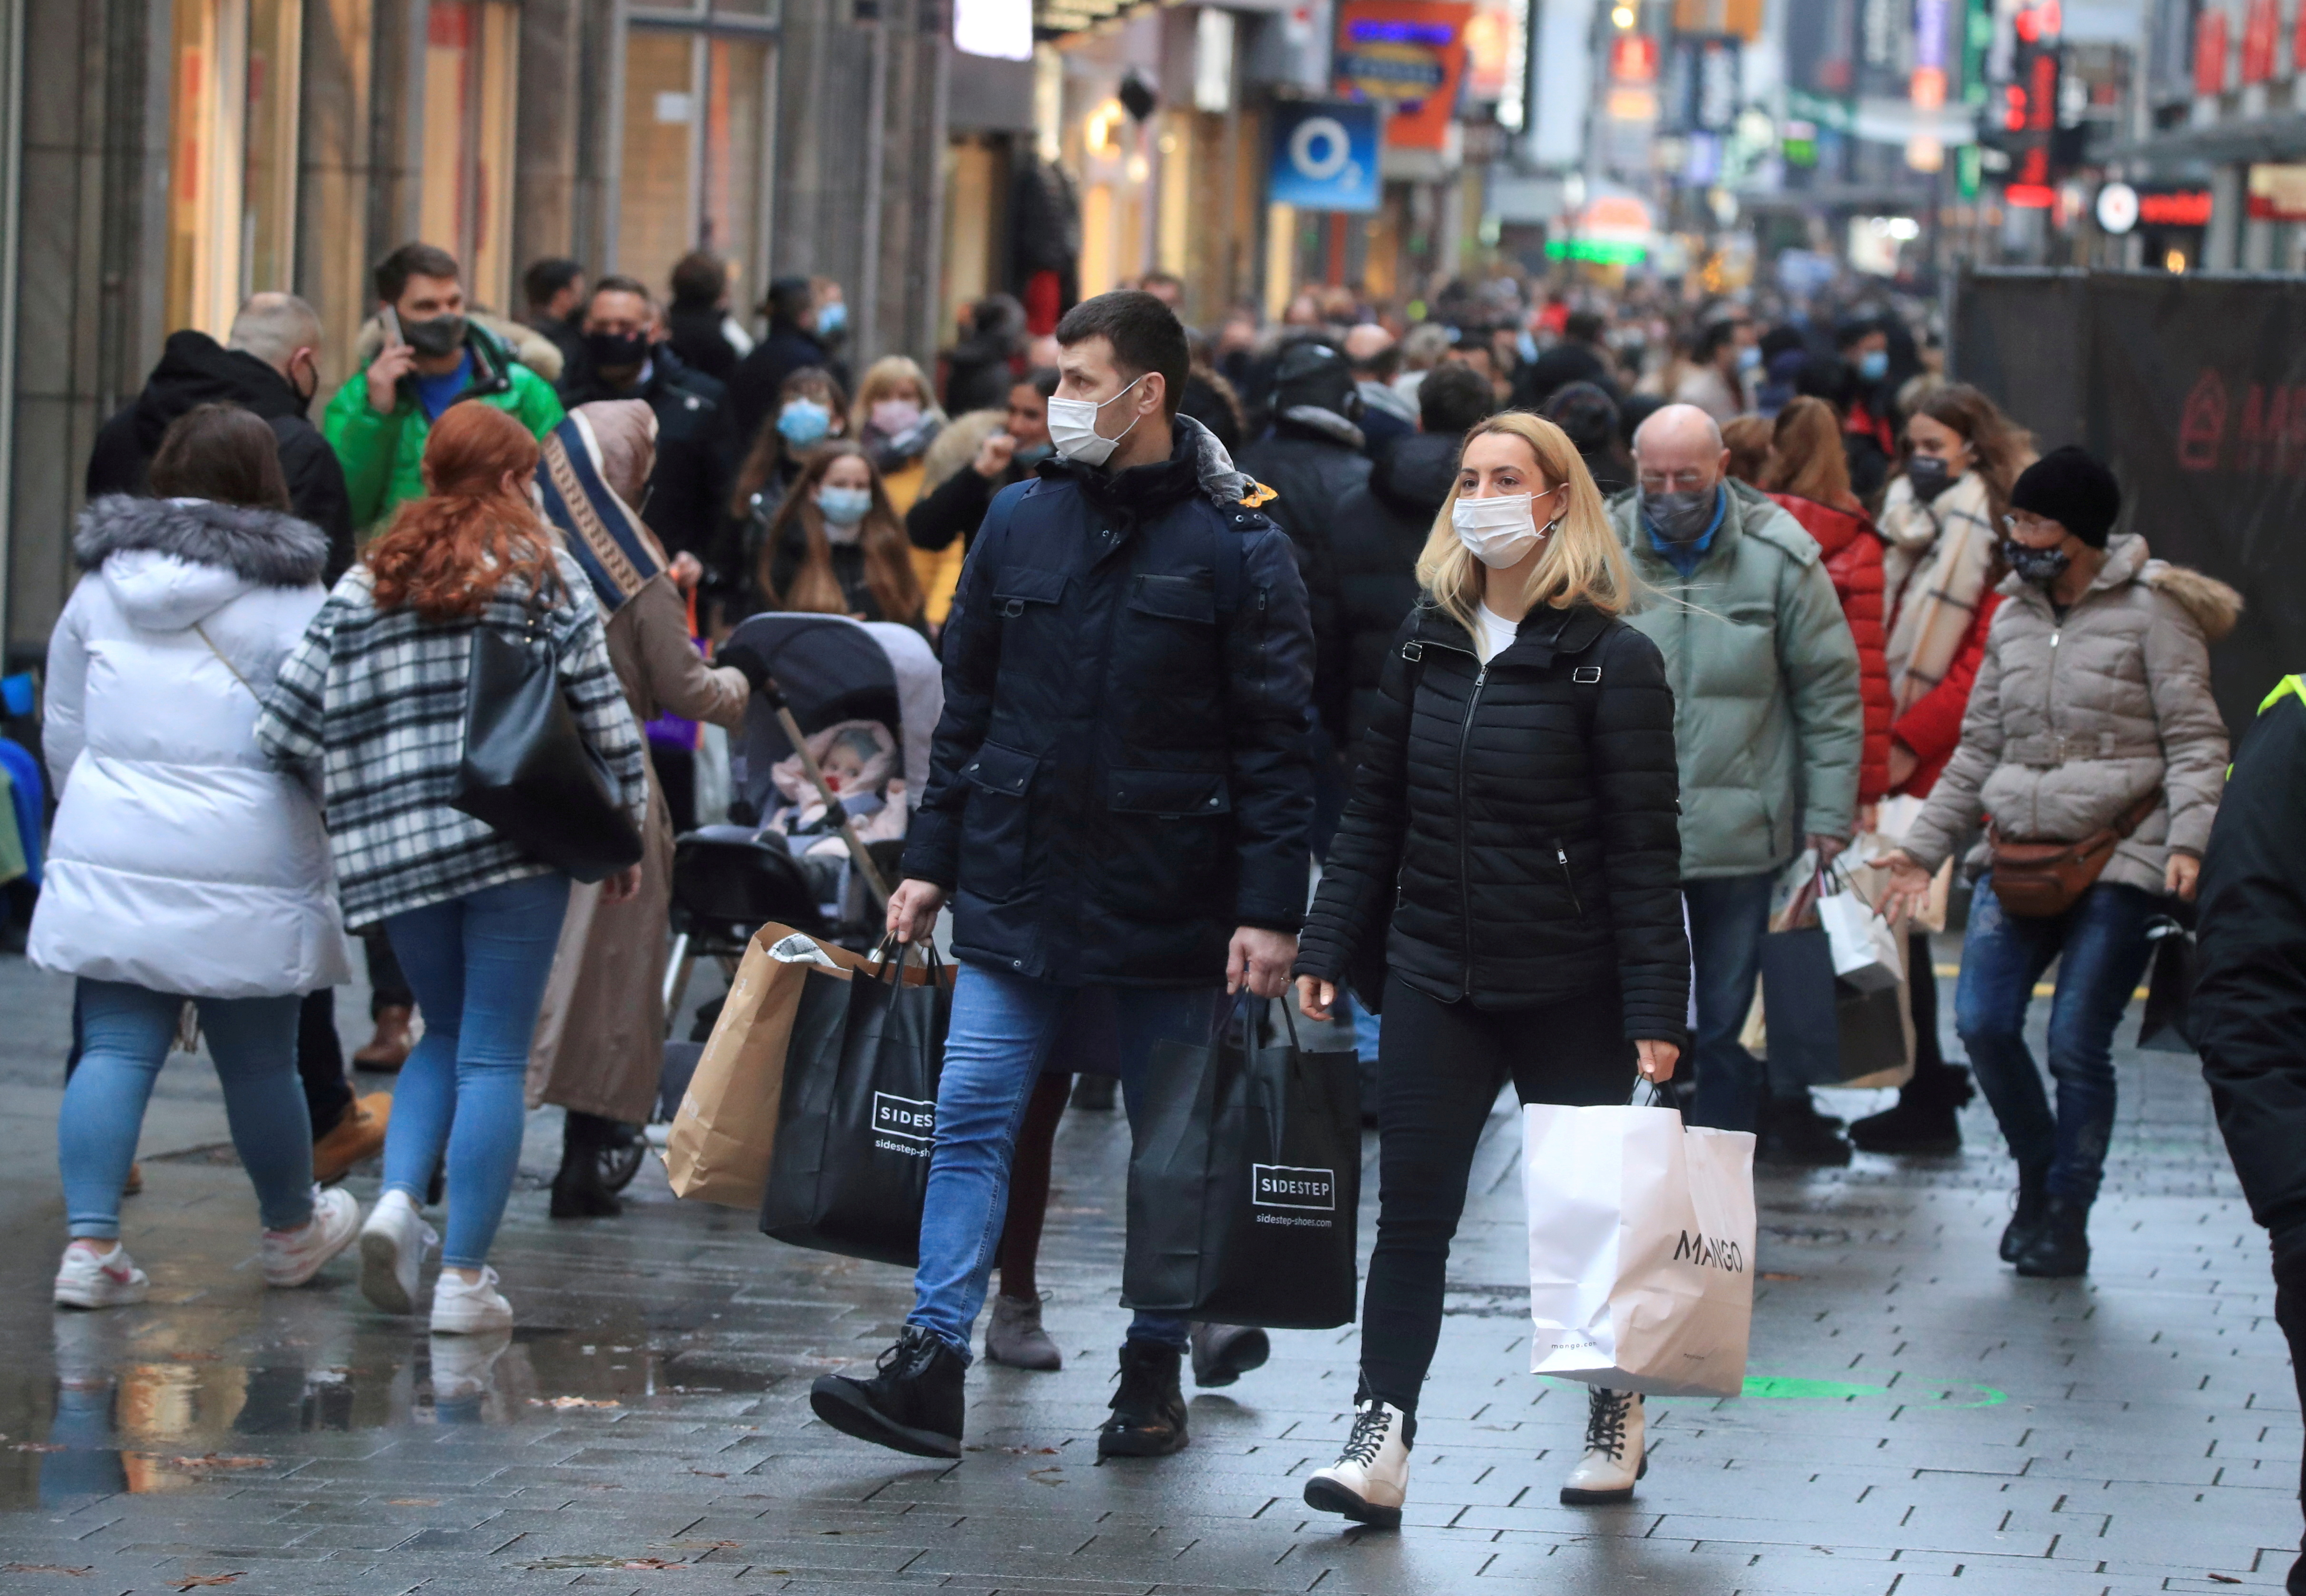 Cologne's shopping street during the coronavirus pandemic, Germany